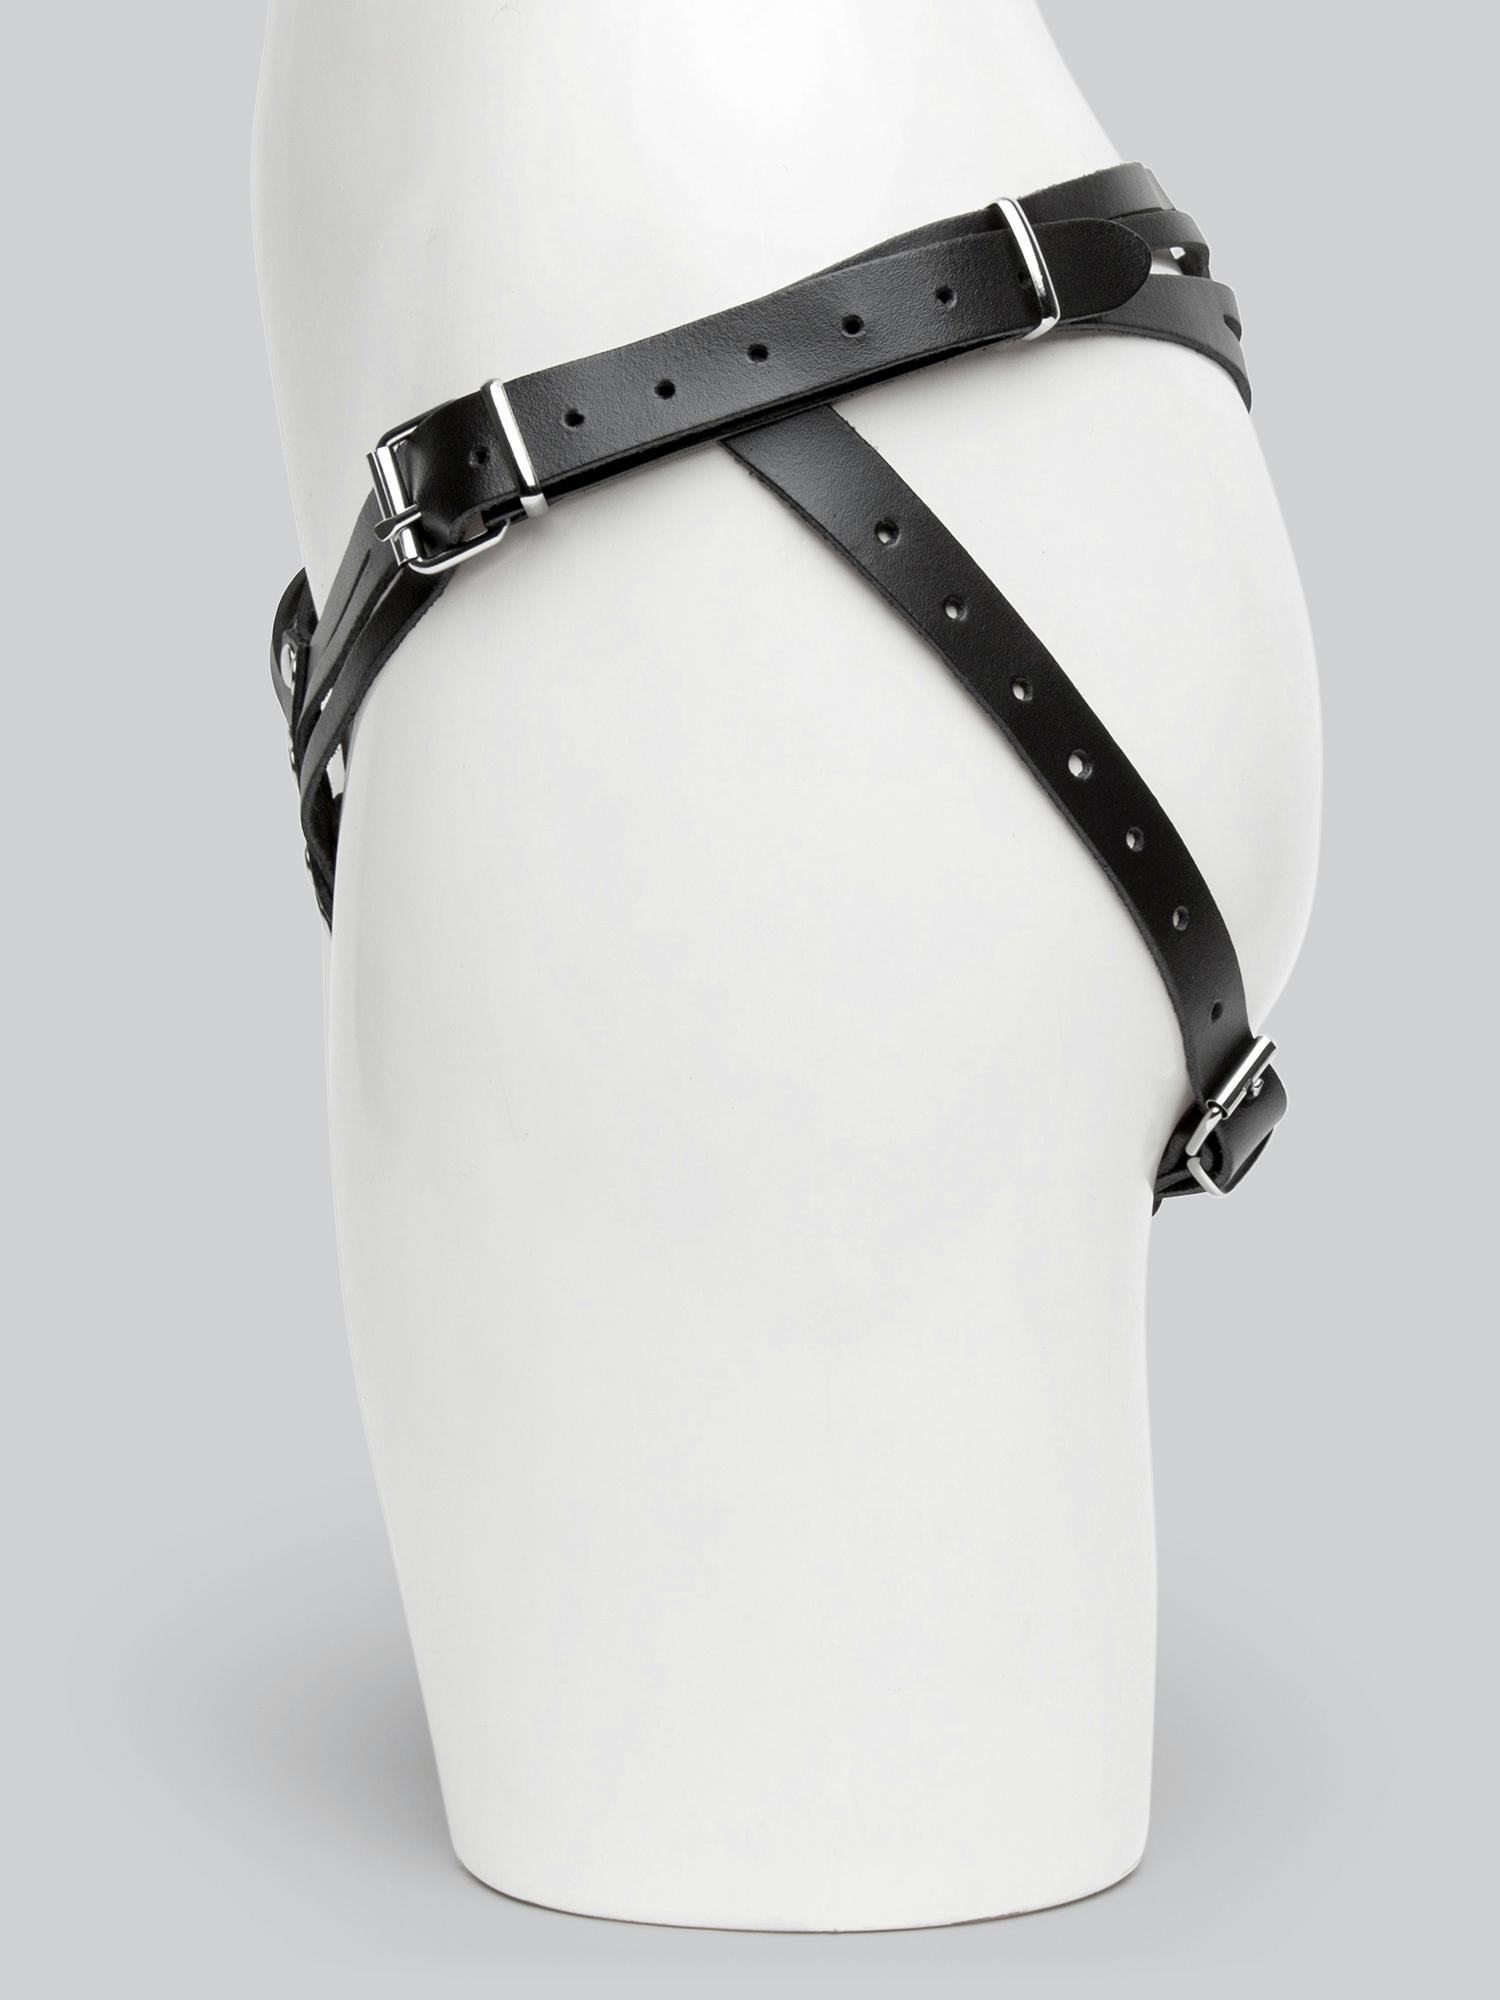 DOMINIX Deluxe Leather Strap-On Harness. Slide 2